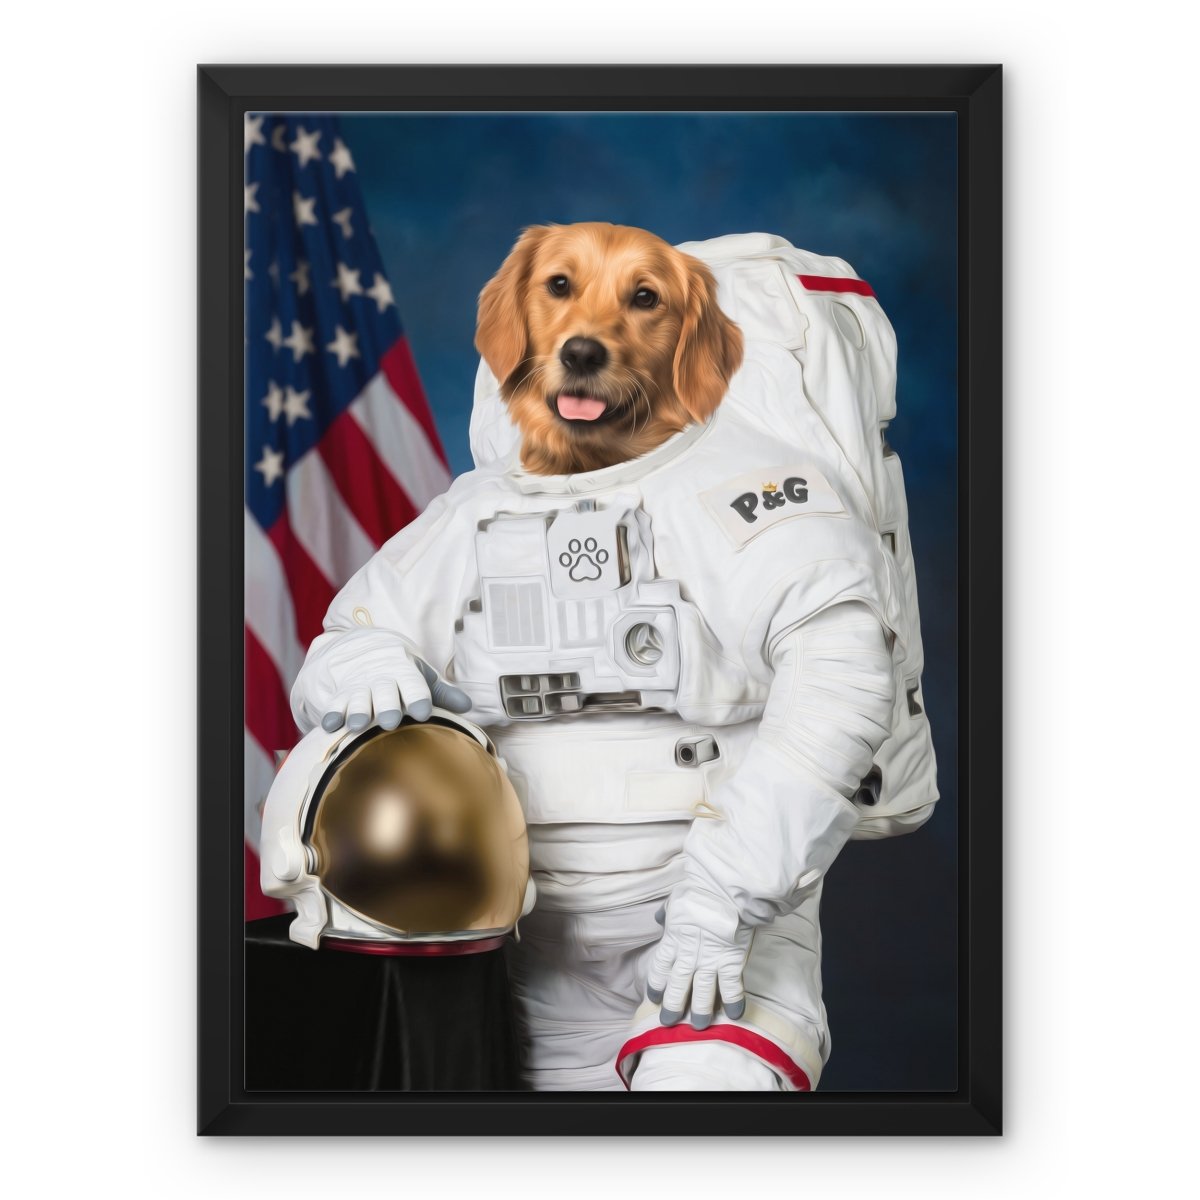 The Astronaut: Custom Pet Canvas - Paw & Glory - #pet portraits# - #dog portraits# - #pet portraits uk#paw & glory, custom pet portrait canvas,dog canvas, personalized dog and owner canvas uk, dog canvas print, personalised dog canvas uk, best pet canvas art